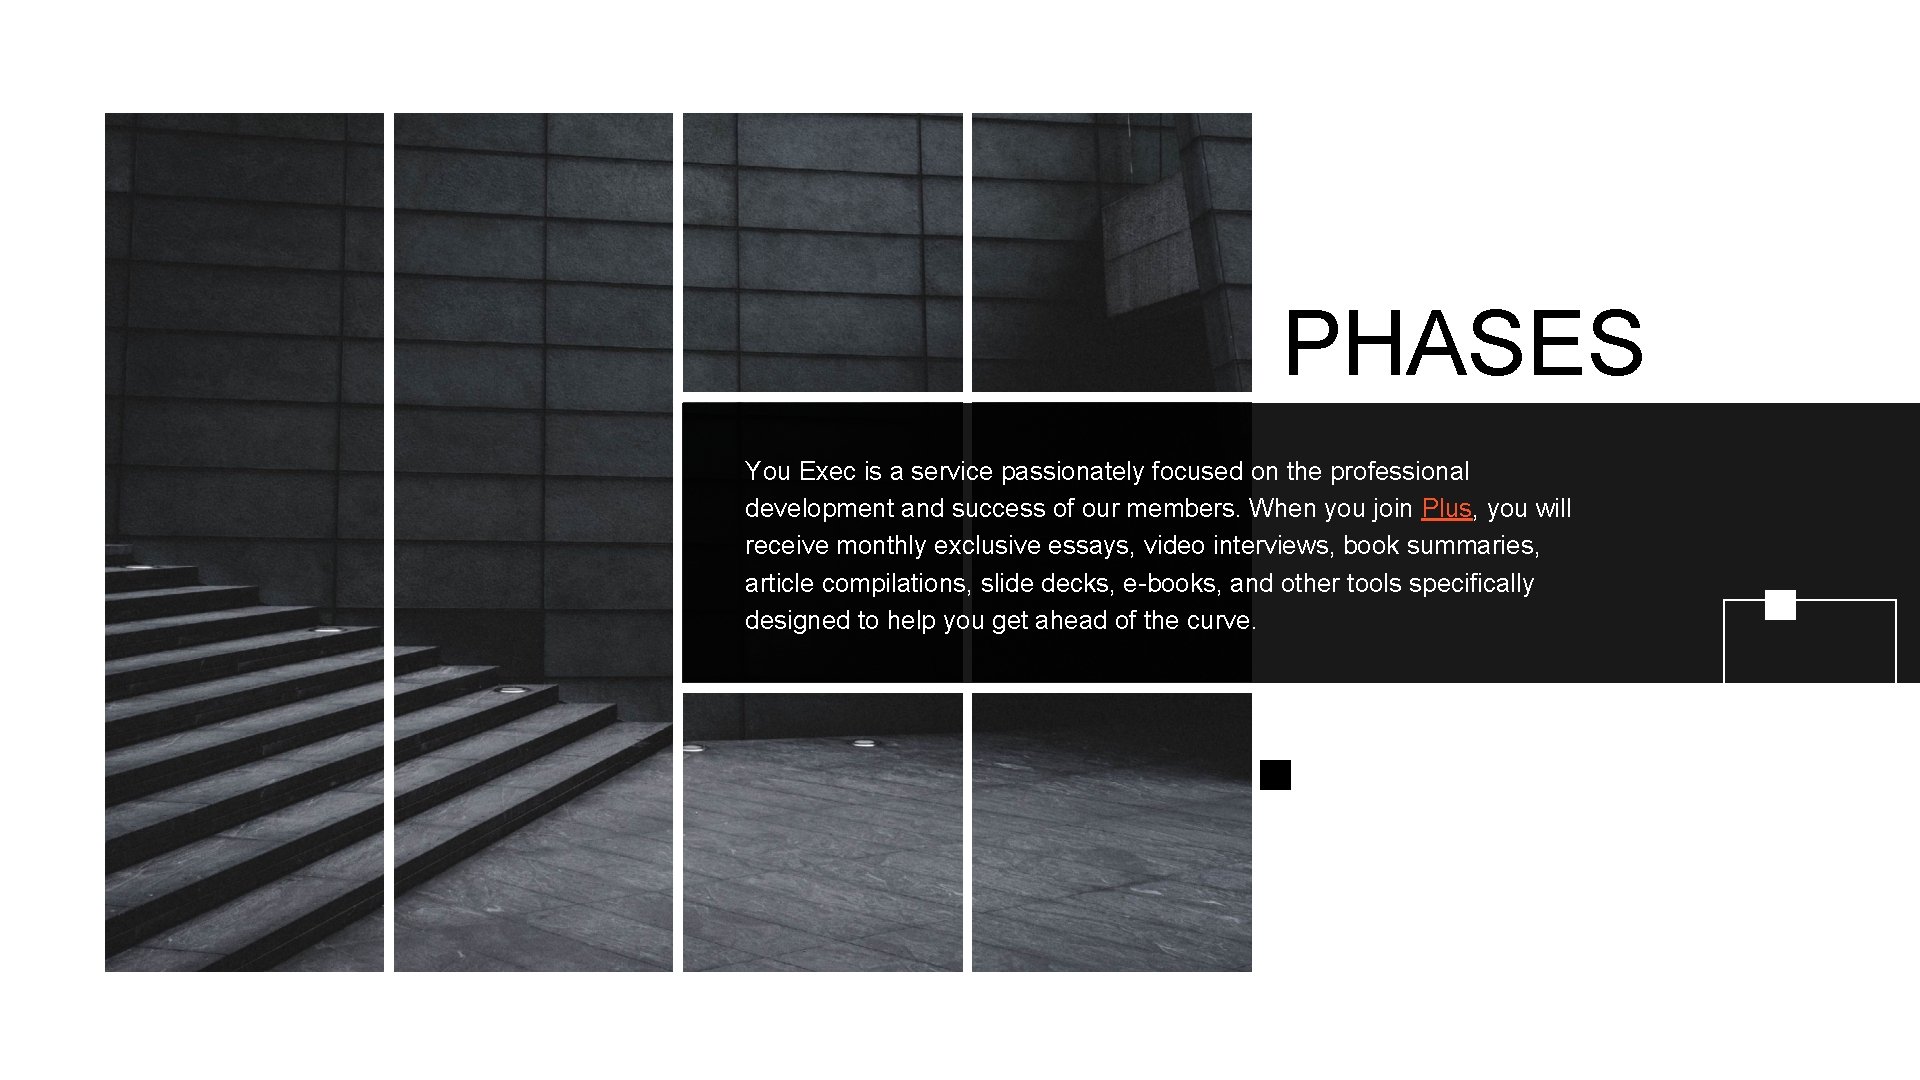 PHASES You Exec is a service passionately focused on the professional development and success